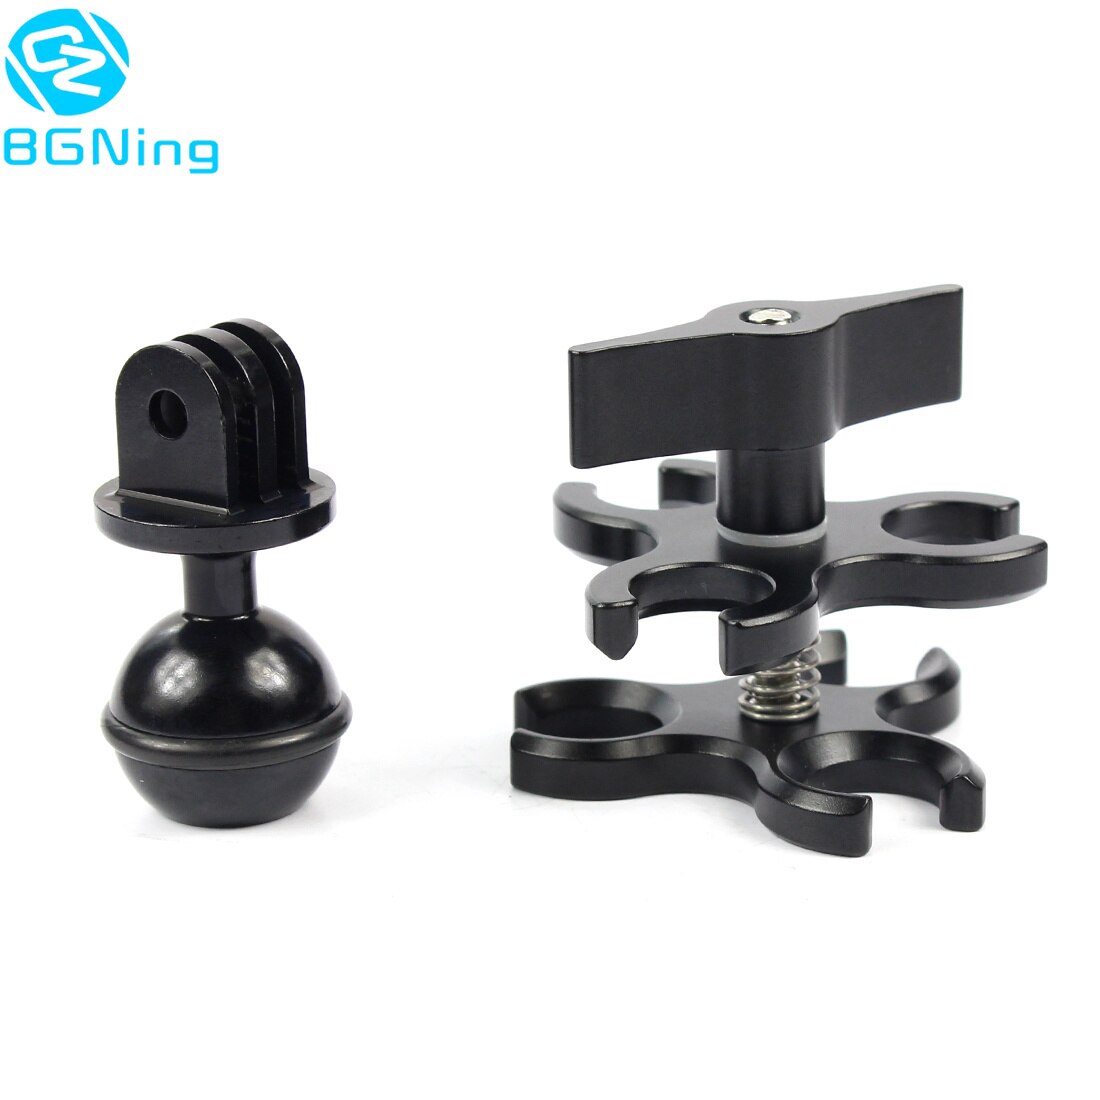 BGNing 3-Hole Aluminum Triple Butterfly Clip Clamp Mount + Ball Head Adapter for Scuba Diving Lights Arm Fixture LED Hero 5/4/3 Camera